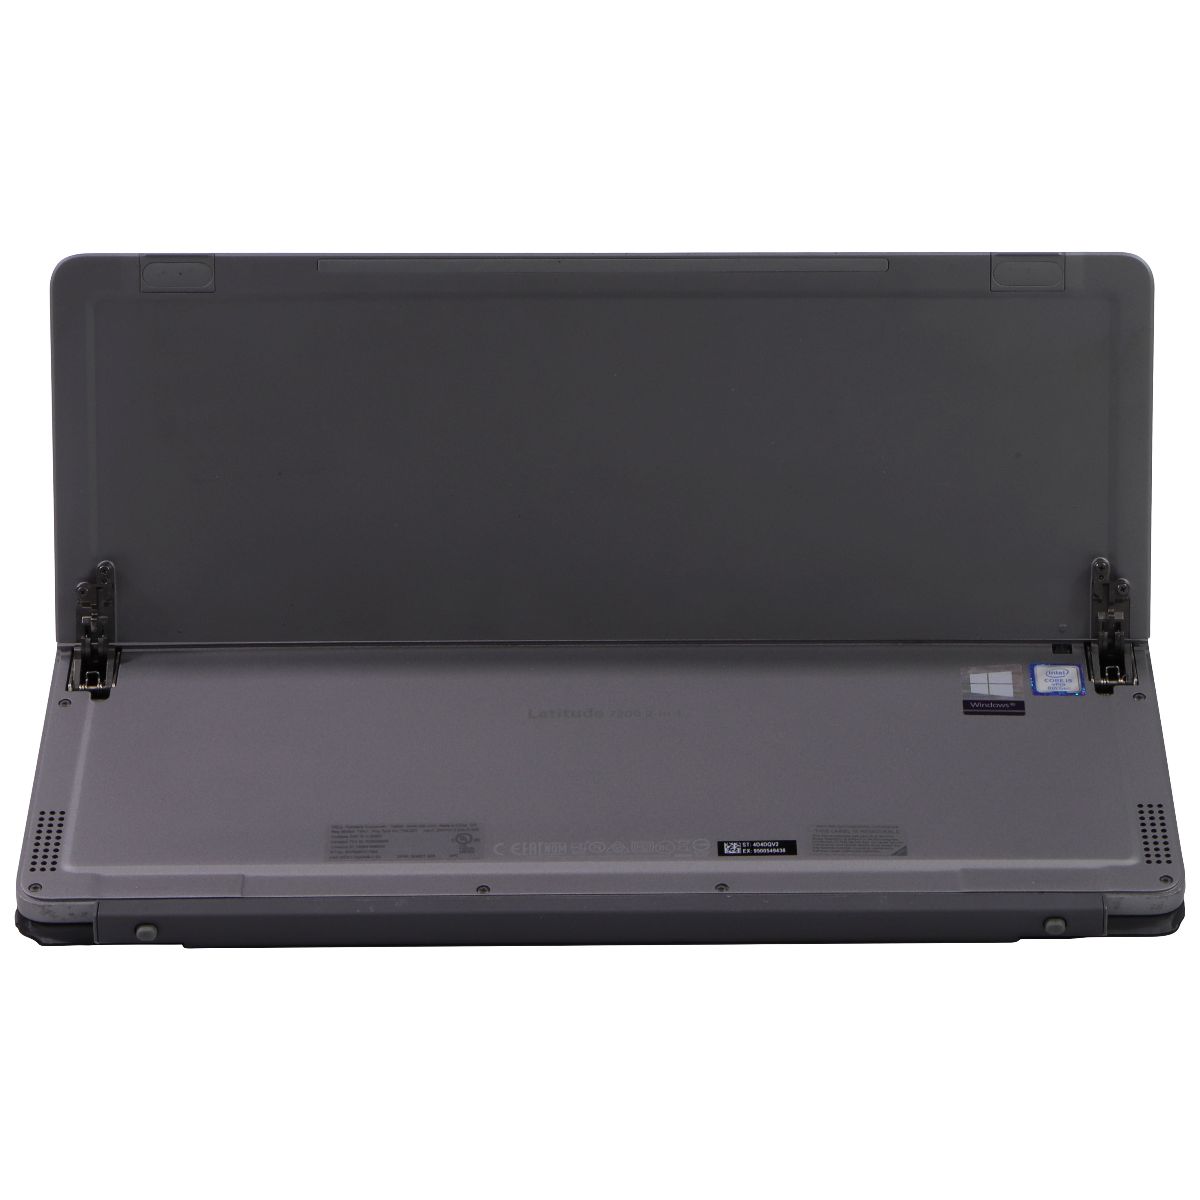 Dell Latitude 7200 (12.3-in) 2-in-1 T04J i5-8365U/256GB/8GB/Win 10 Pro - Silver Laptops - PC Laptops & Netbooks Dell    - Simple Cell Bulk Wholesale Pricing - USA Seller